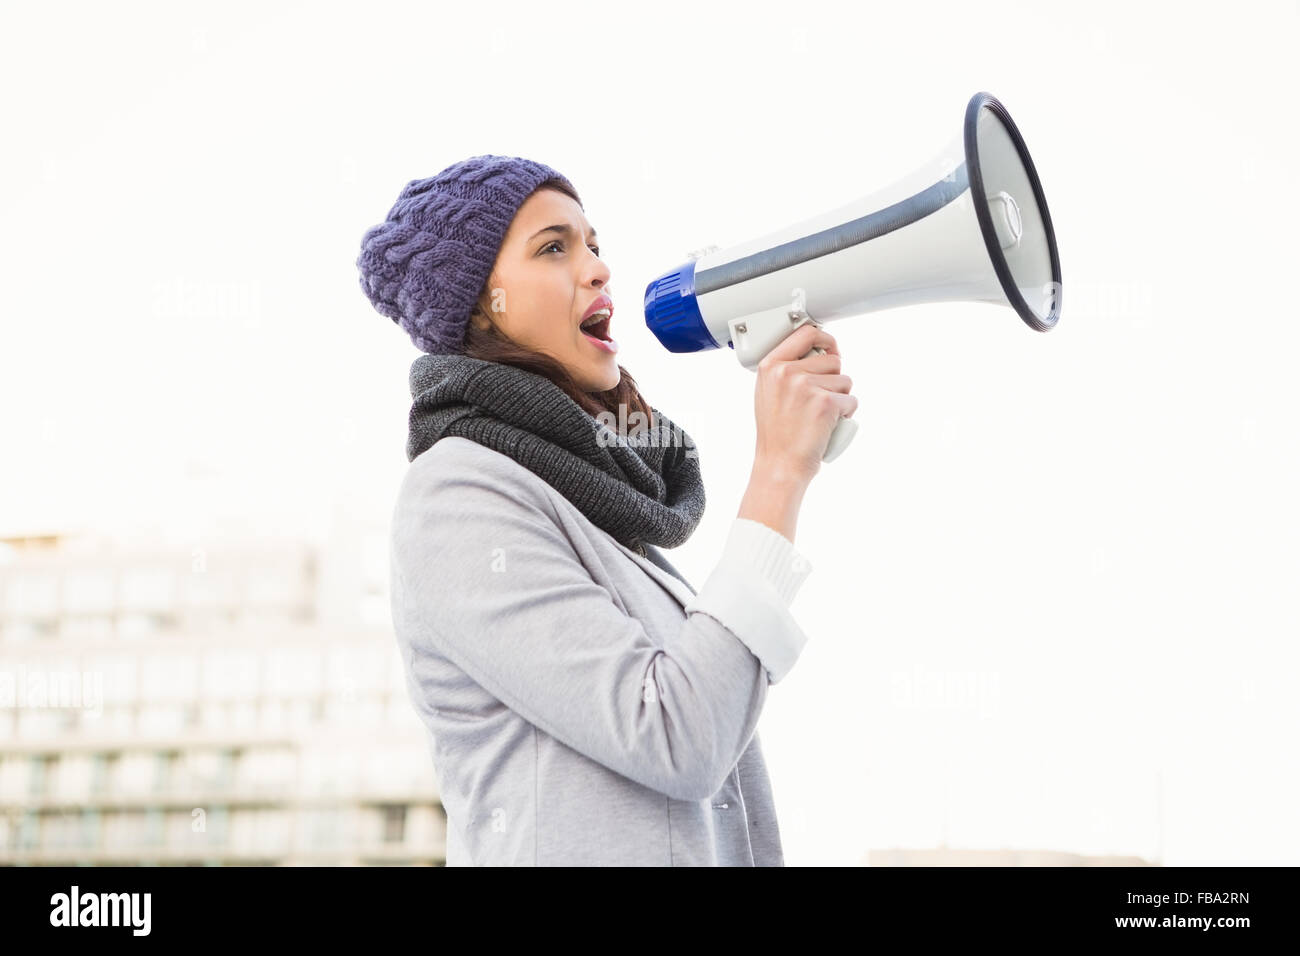 Serious woman shouting with megaphone Stock Photo